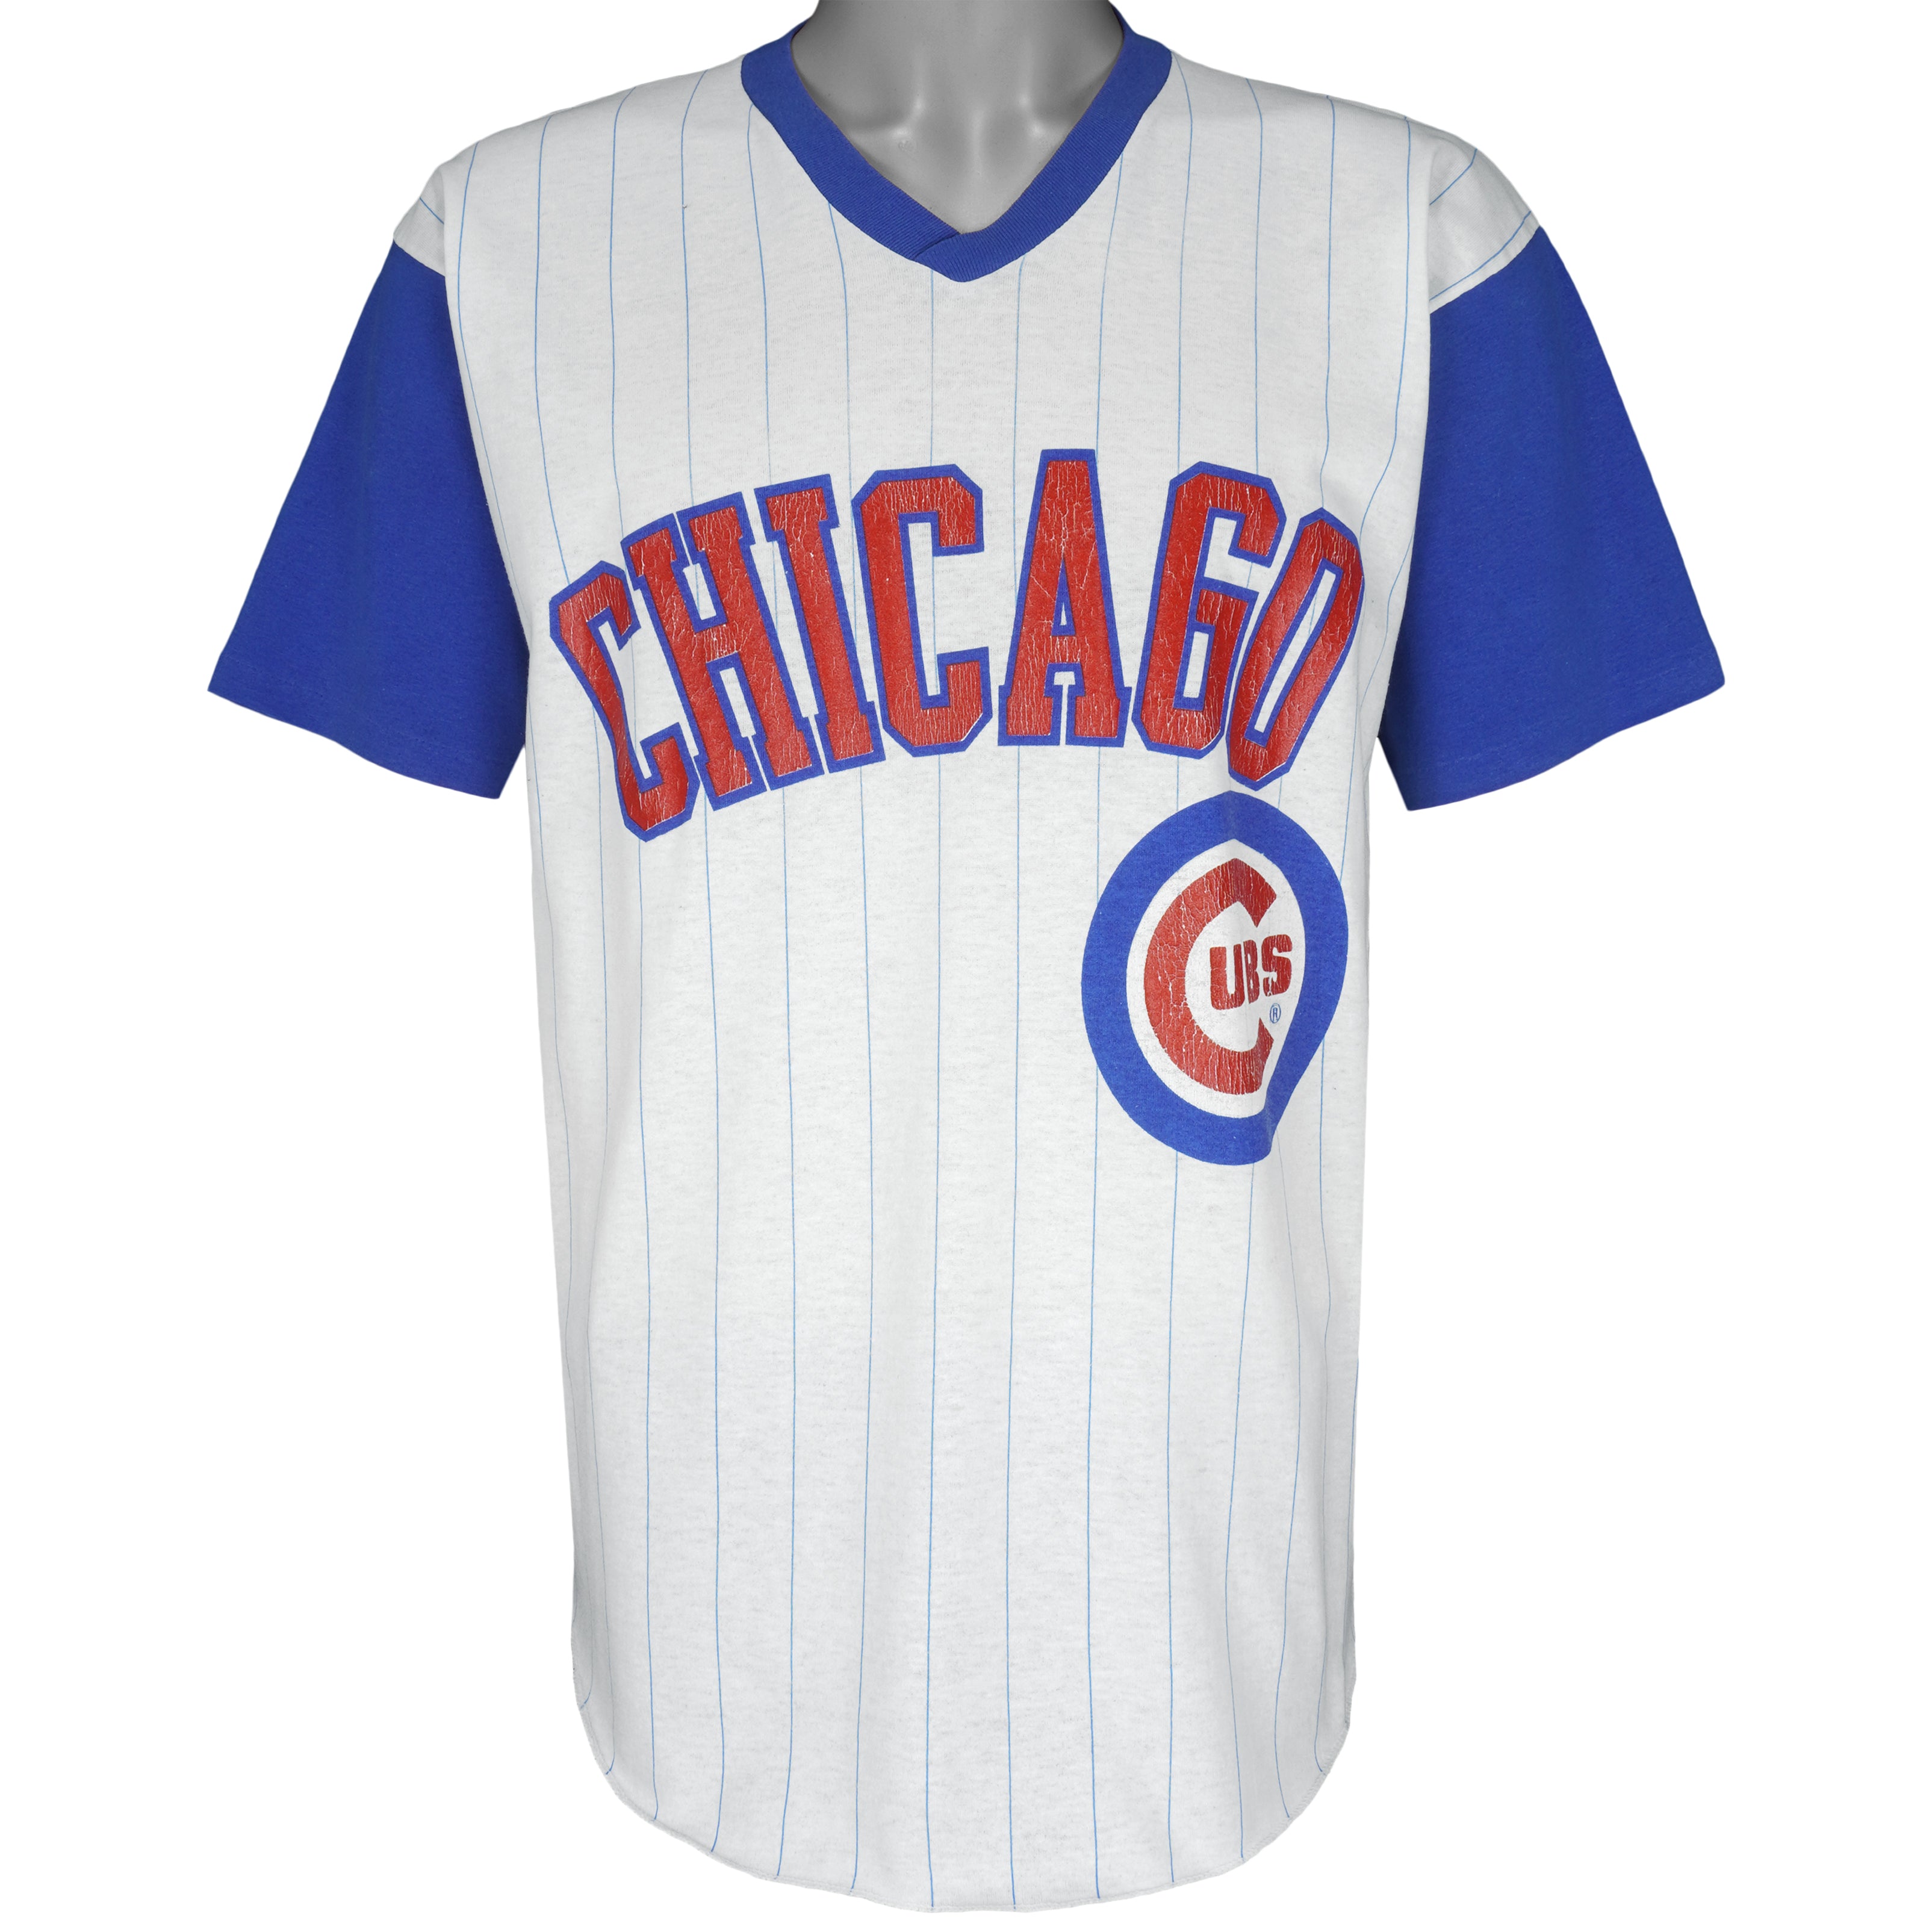 New MLB Chicago Cubs Baseball Embroidered Wrigley Field Jersey